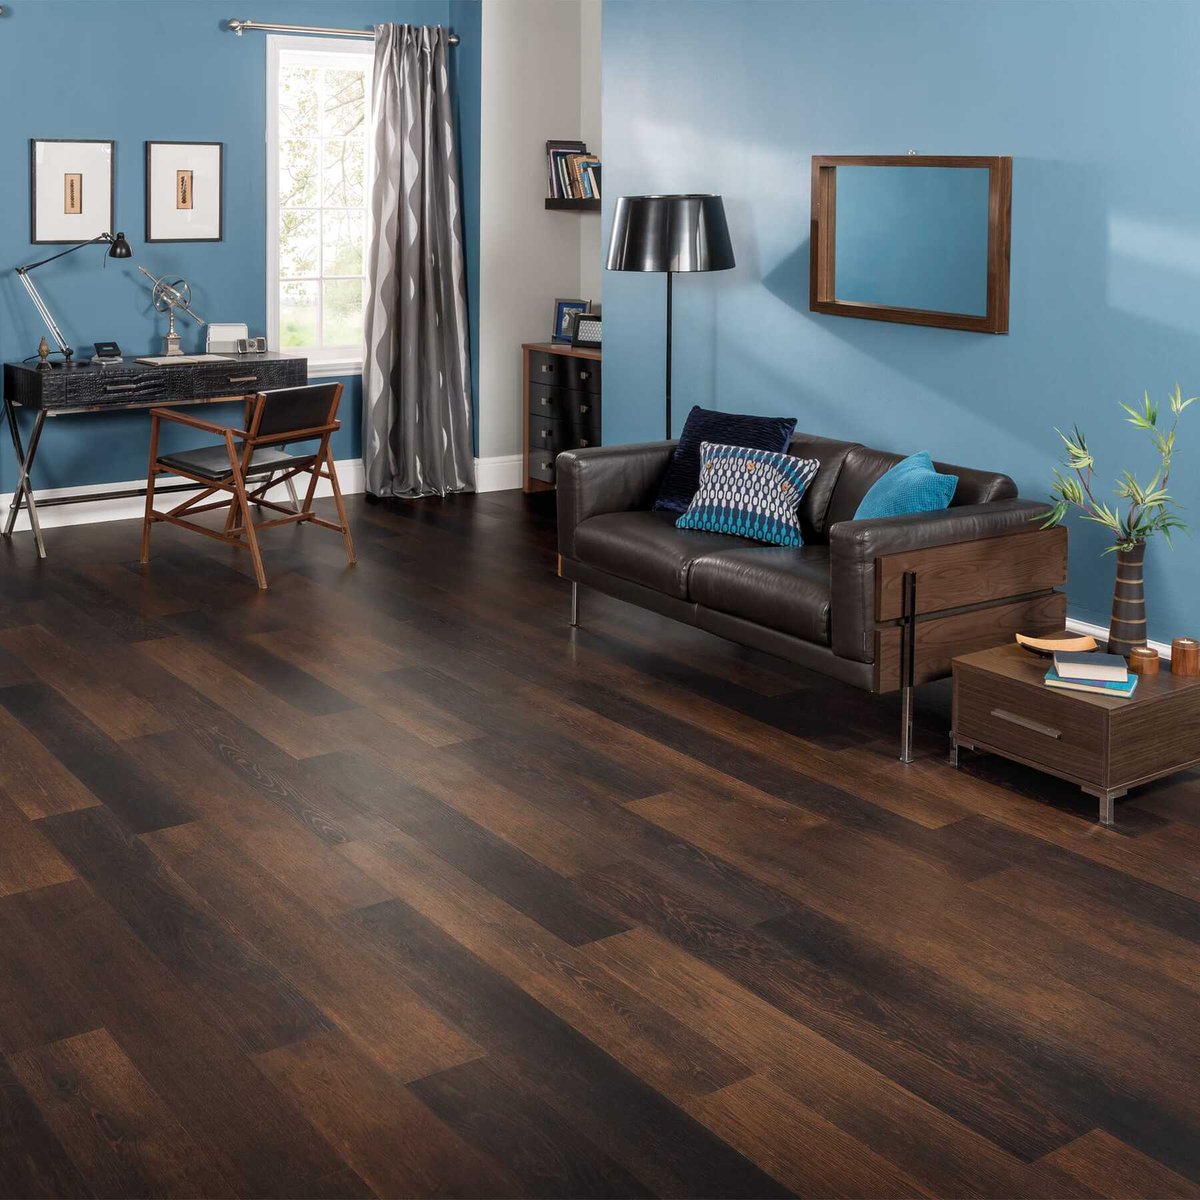 - 
Up to 17% off Karndean Luxury Vinyl Tiles
-
-
Don't miss out!
-
-
Click the link below to shop now!
ow.ly/3af250PqzE4
-
-
-
-
#luxuryinteriors #lvtflooring #surrey #camberley